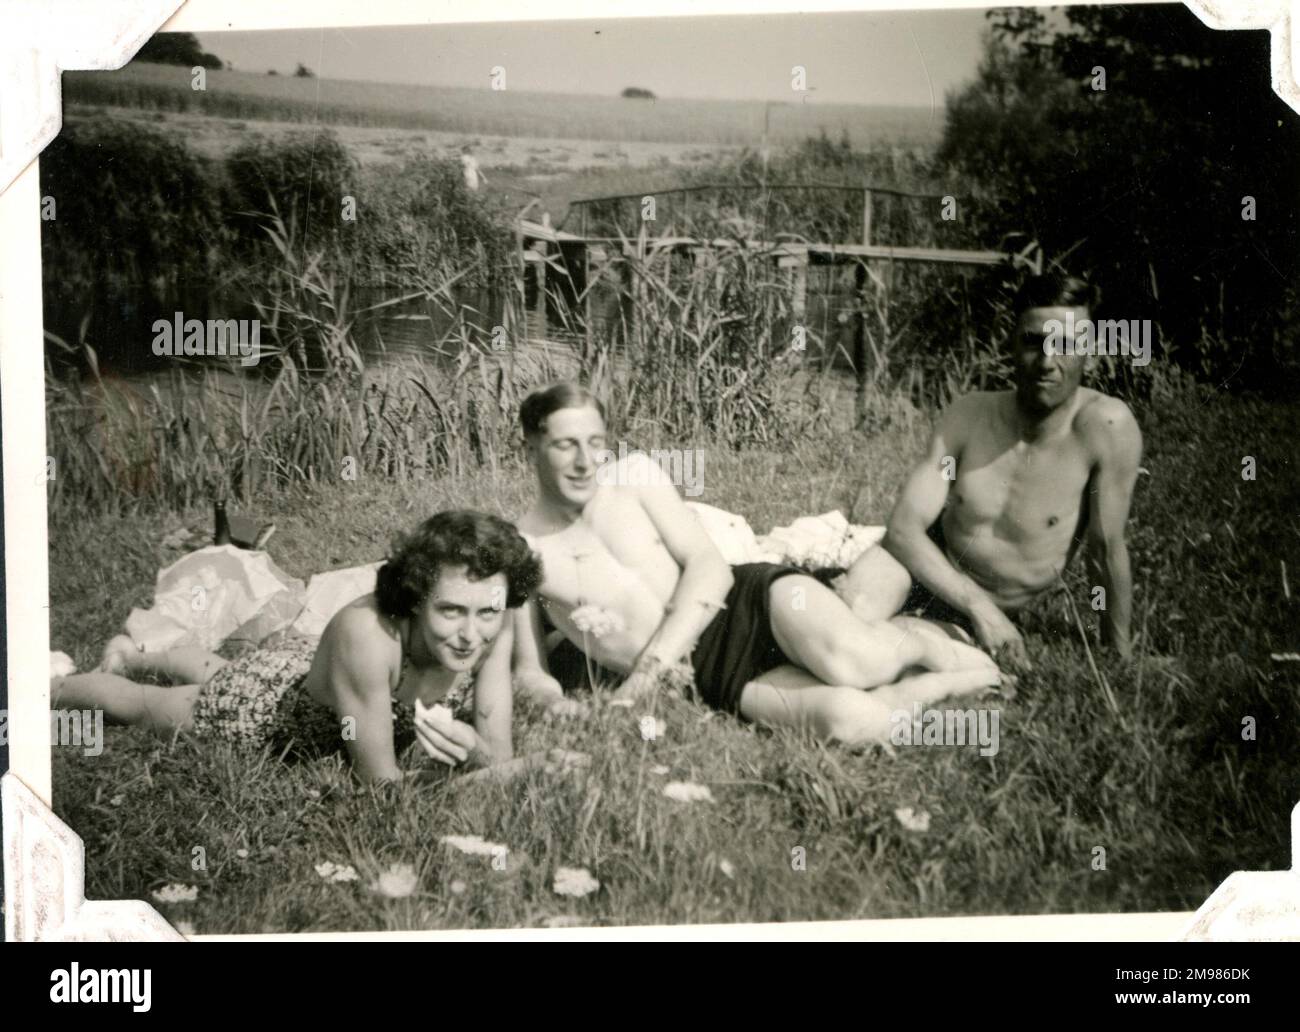 Three people relaxing at Lessingen, Germany, July 1945. Stock Photo